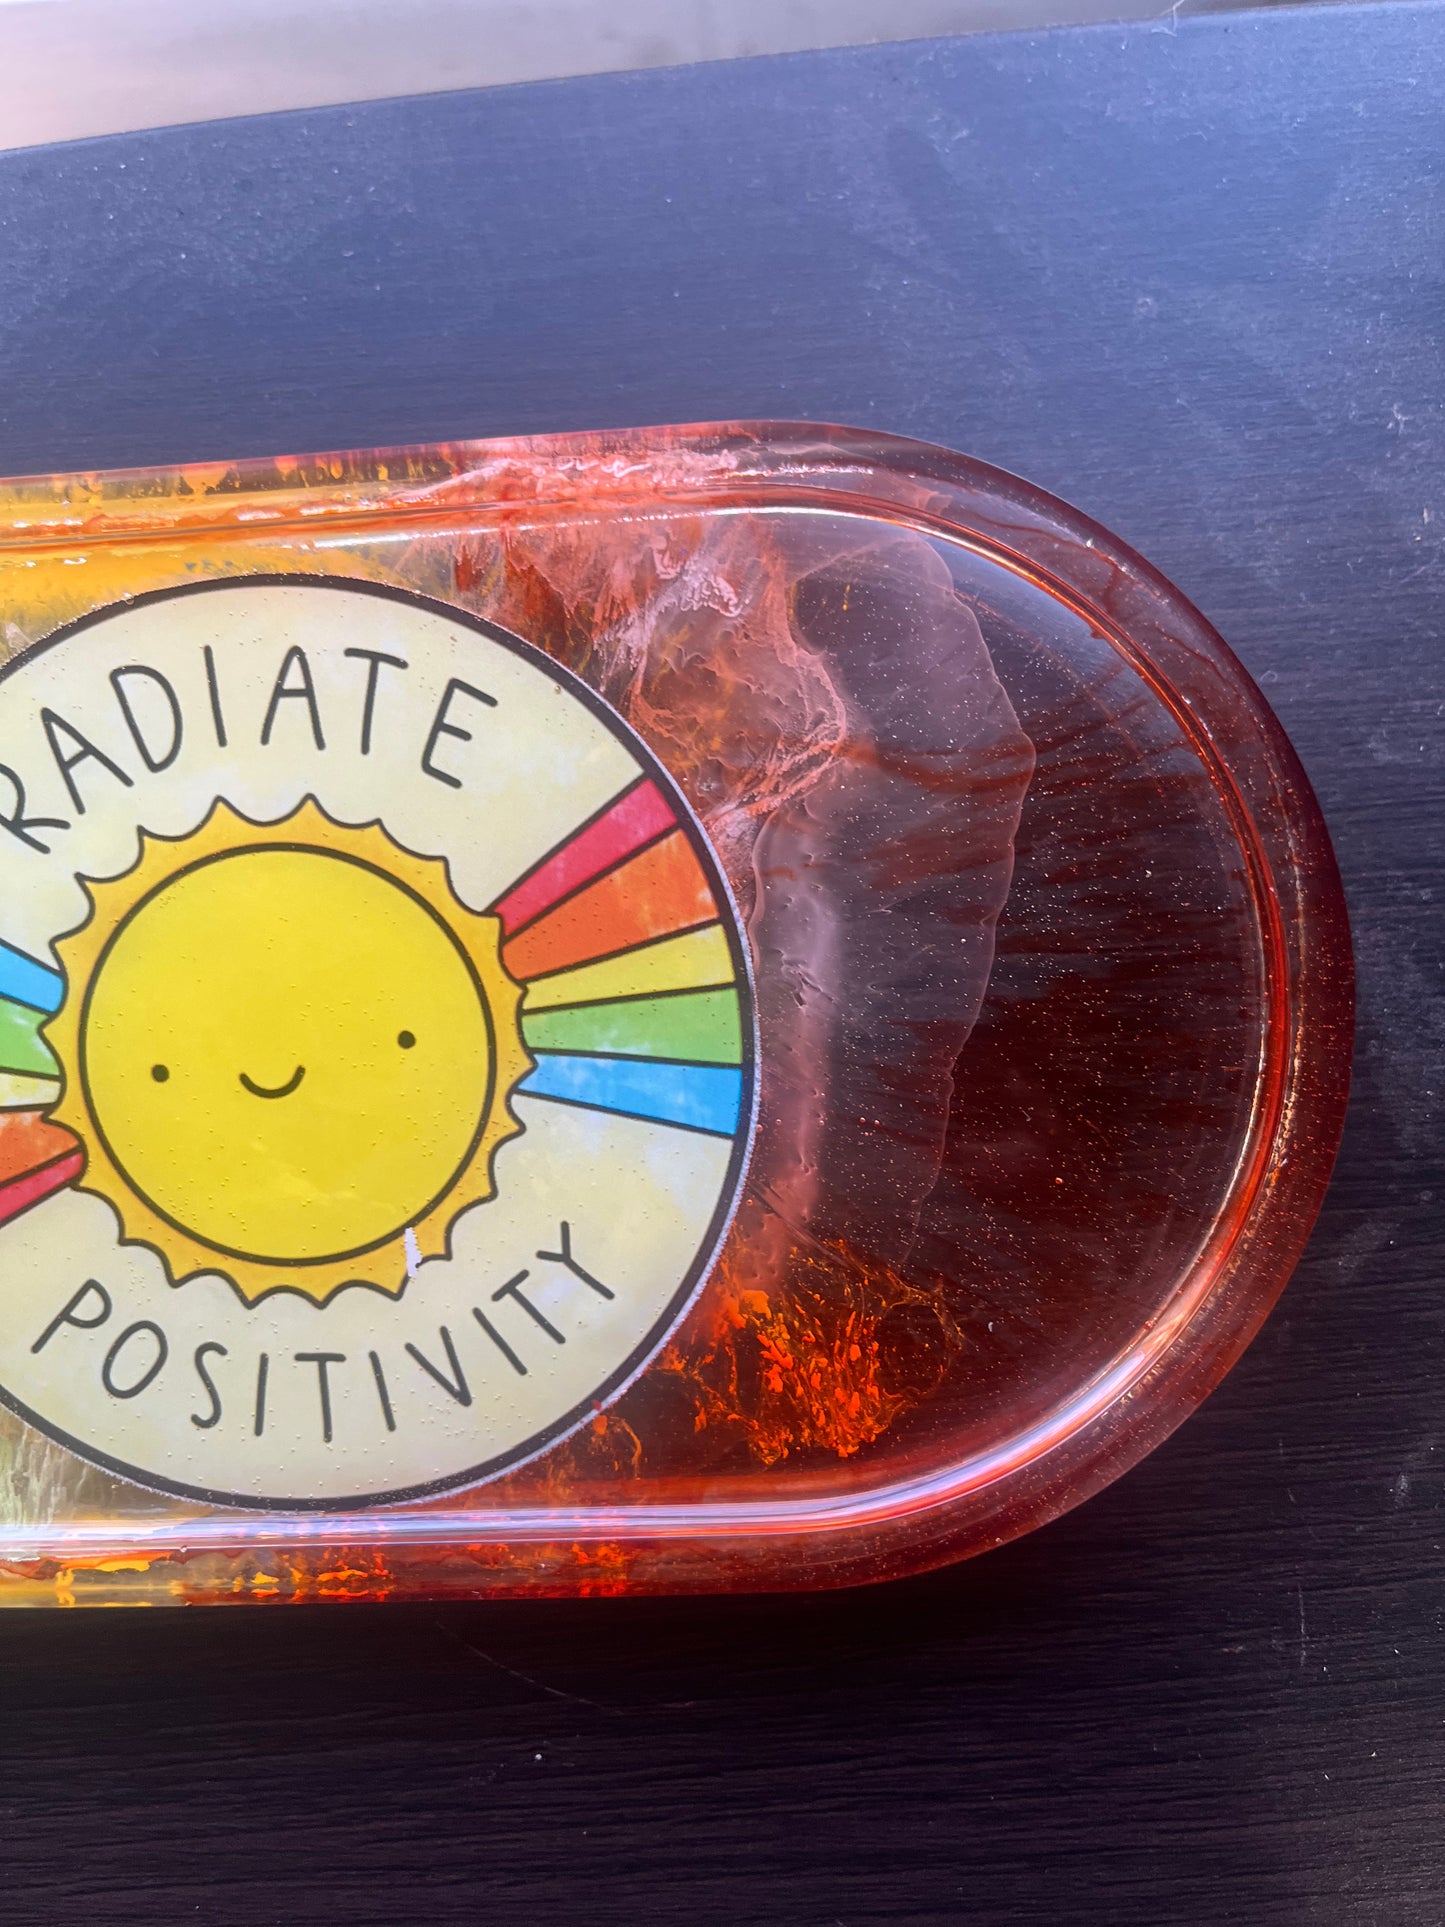 Resin Red Orange Lime Green Radiate Positivity Trinket Crystals Jewelry Arts Crafts Money Change Office Supplies Rolling Portable Multi Use Tray